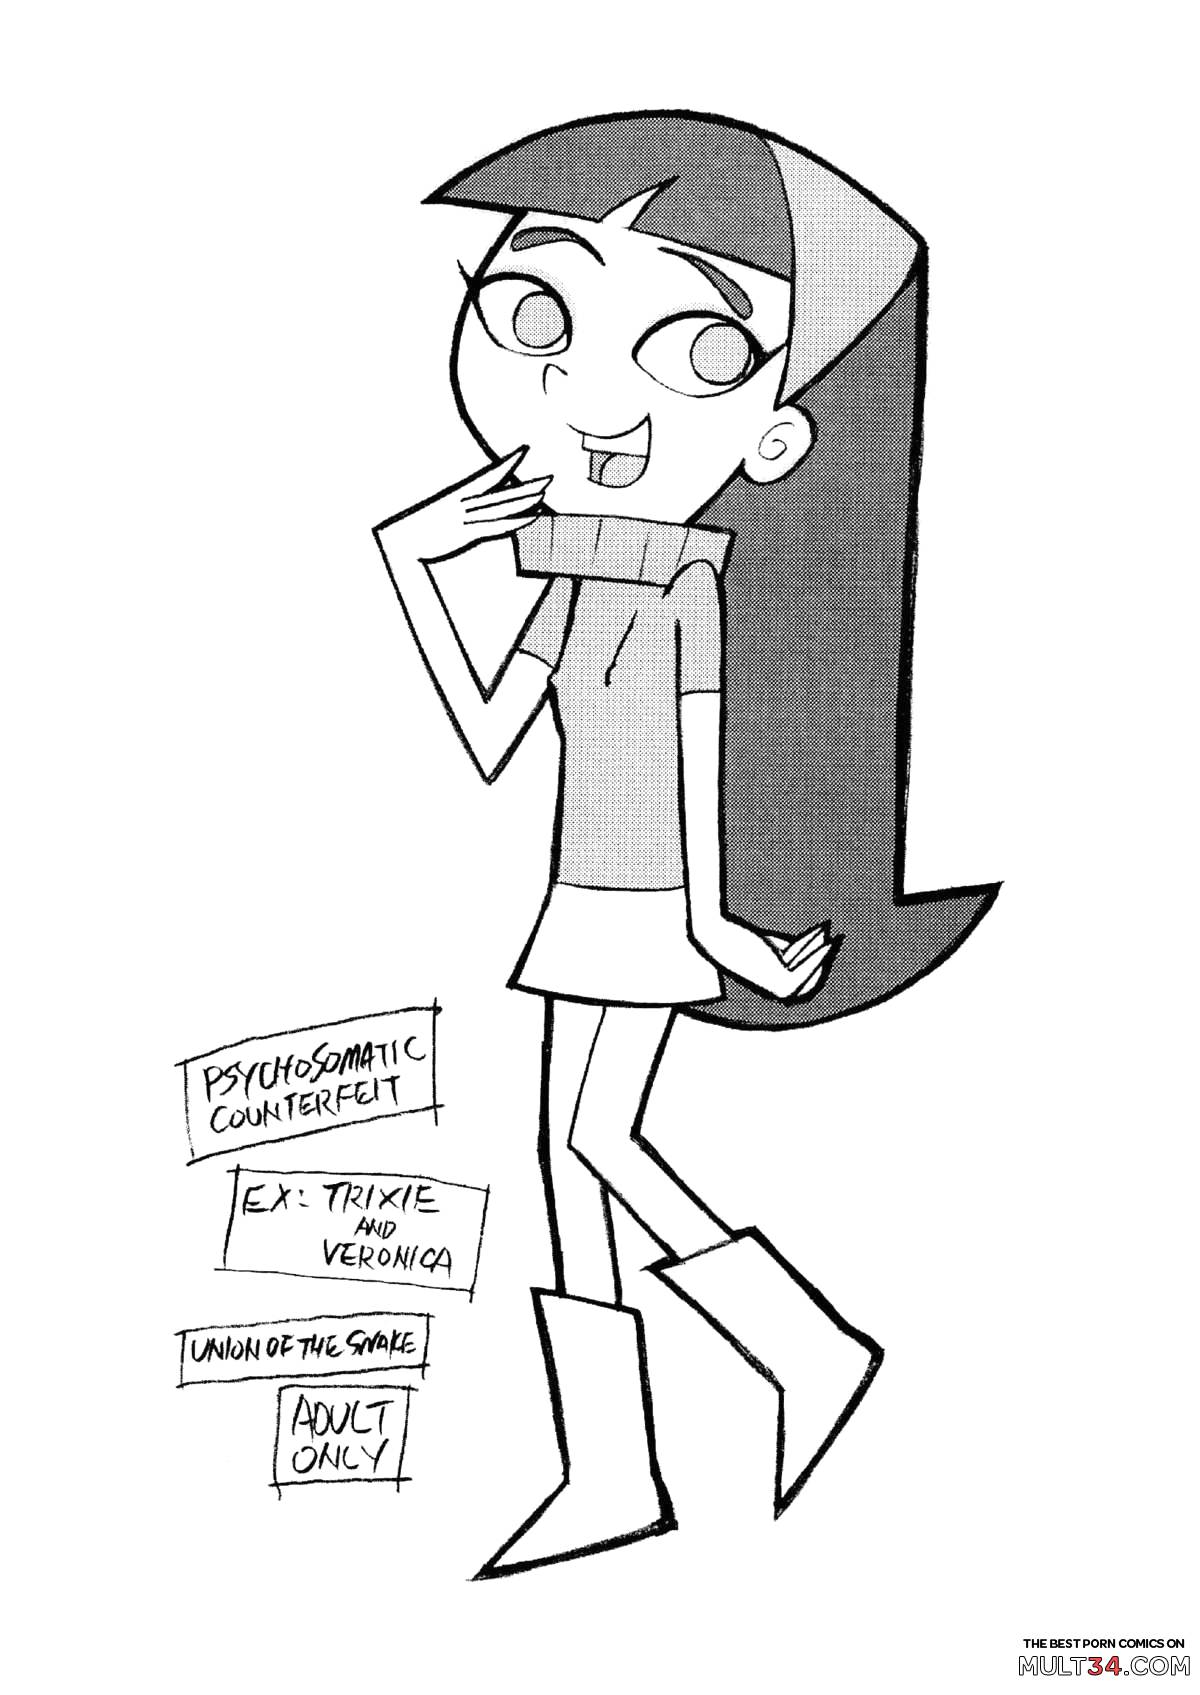 Phineas And Ferb Porn Trixie - Psychosomatic Counterfeit Ex Trixie & Veronica hentai manga for free |  MULT34